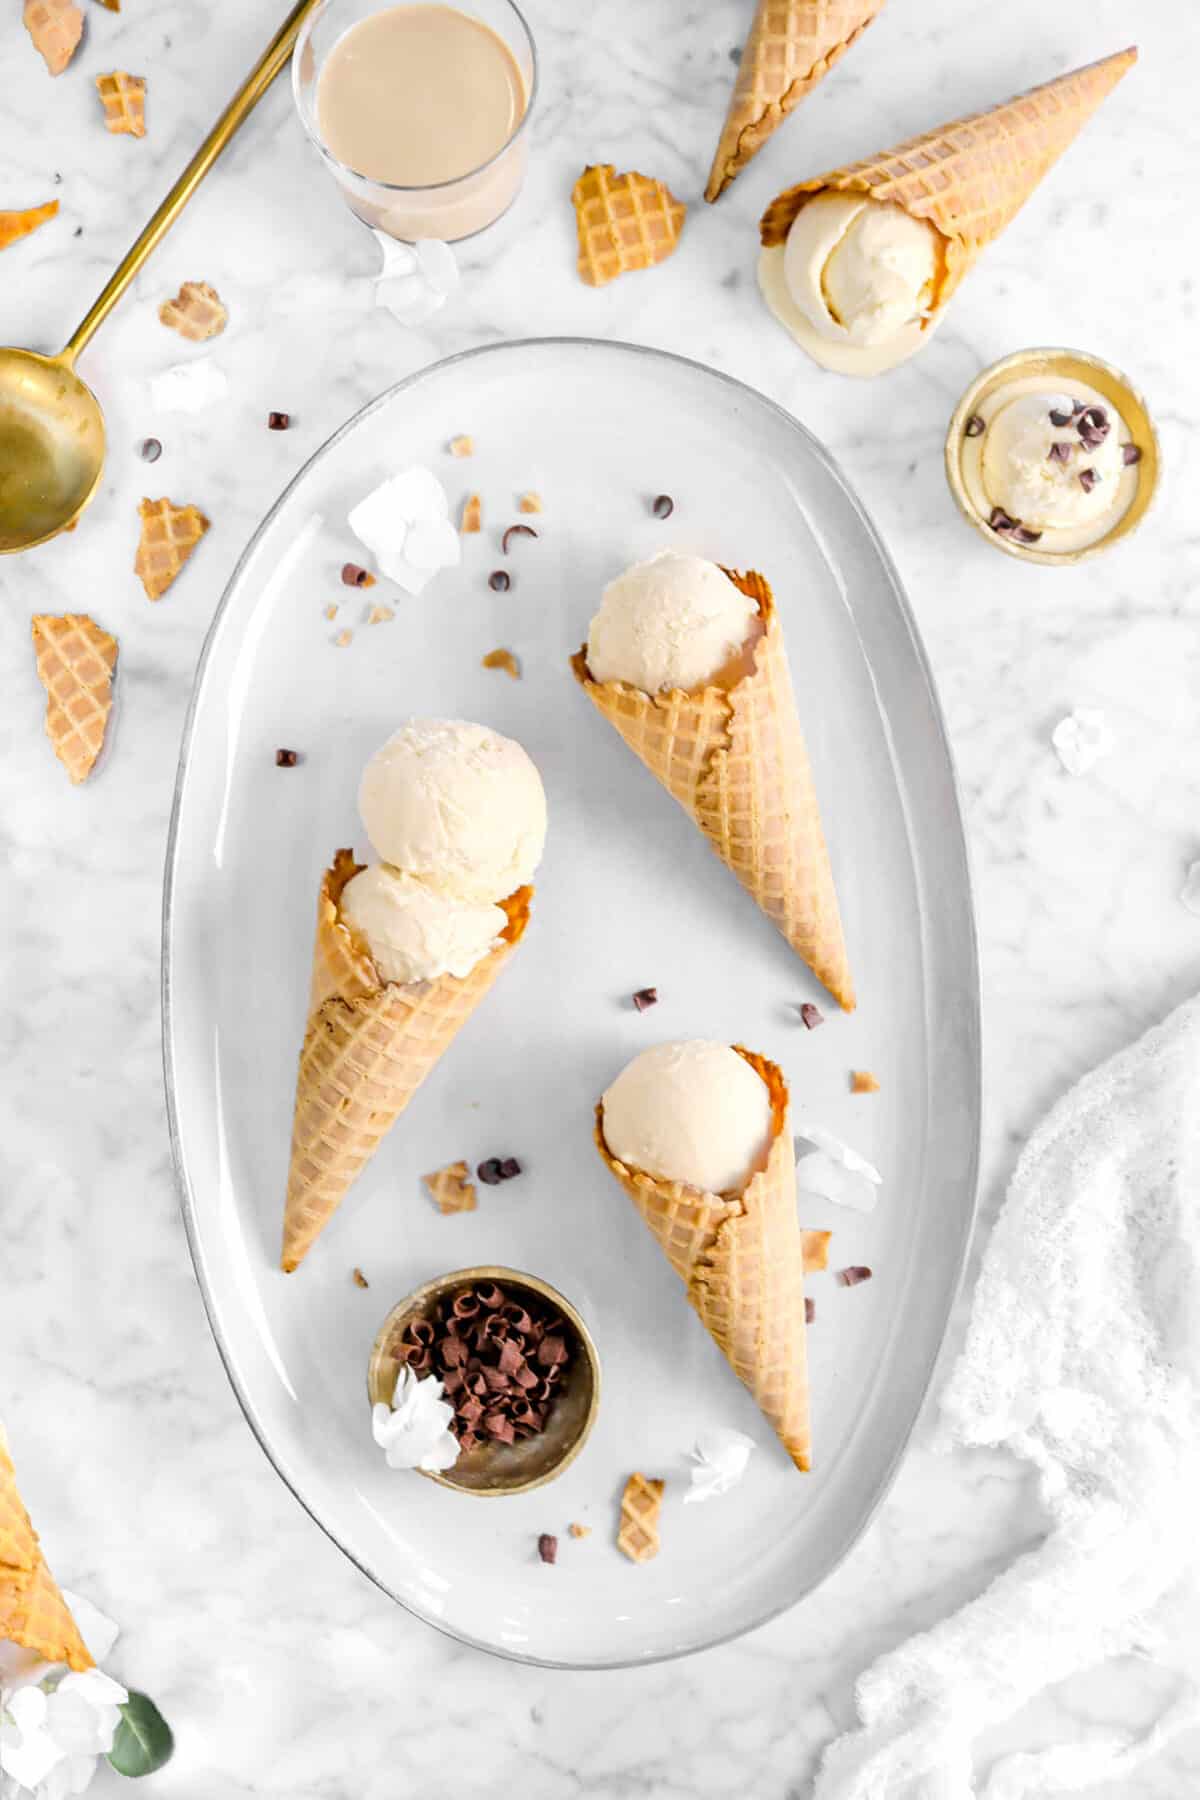 three cones of irish cream ice cream on oval serving board with a bowl of chocolate curls on it, ice cream cones around, a glass of irish cream, gold spoon, and bowl of ice cream